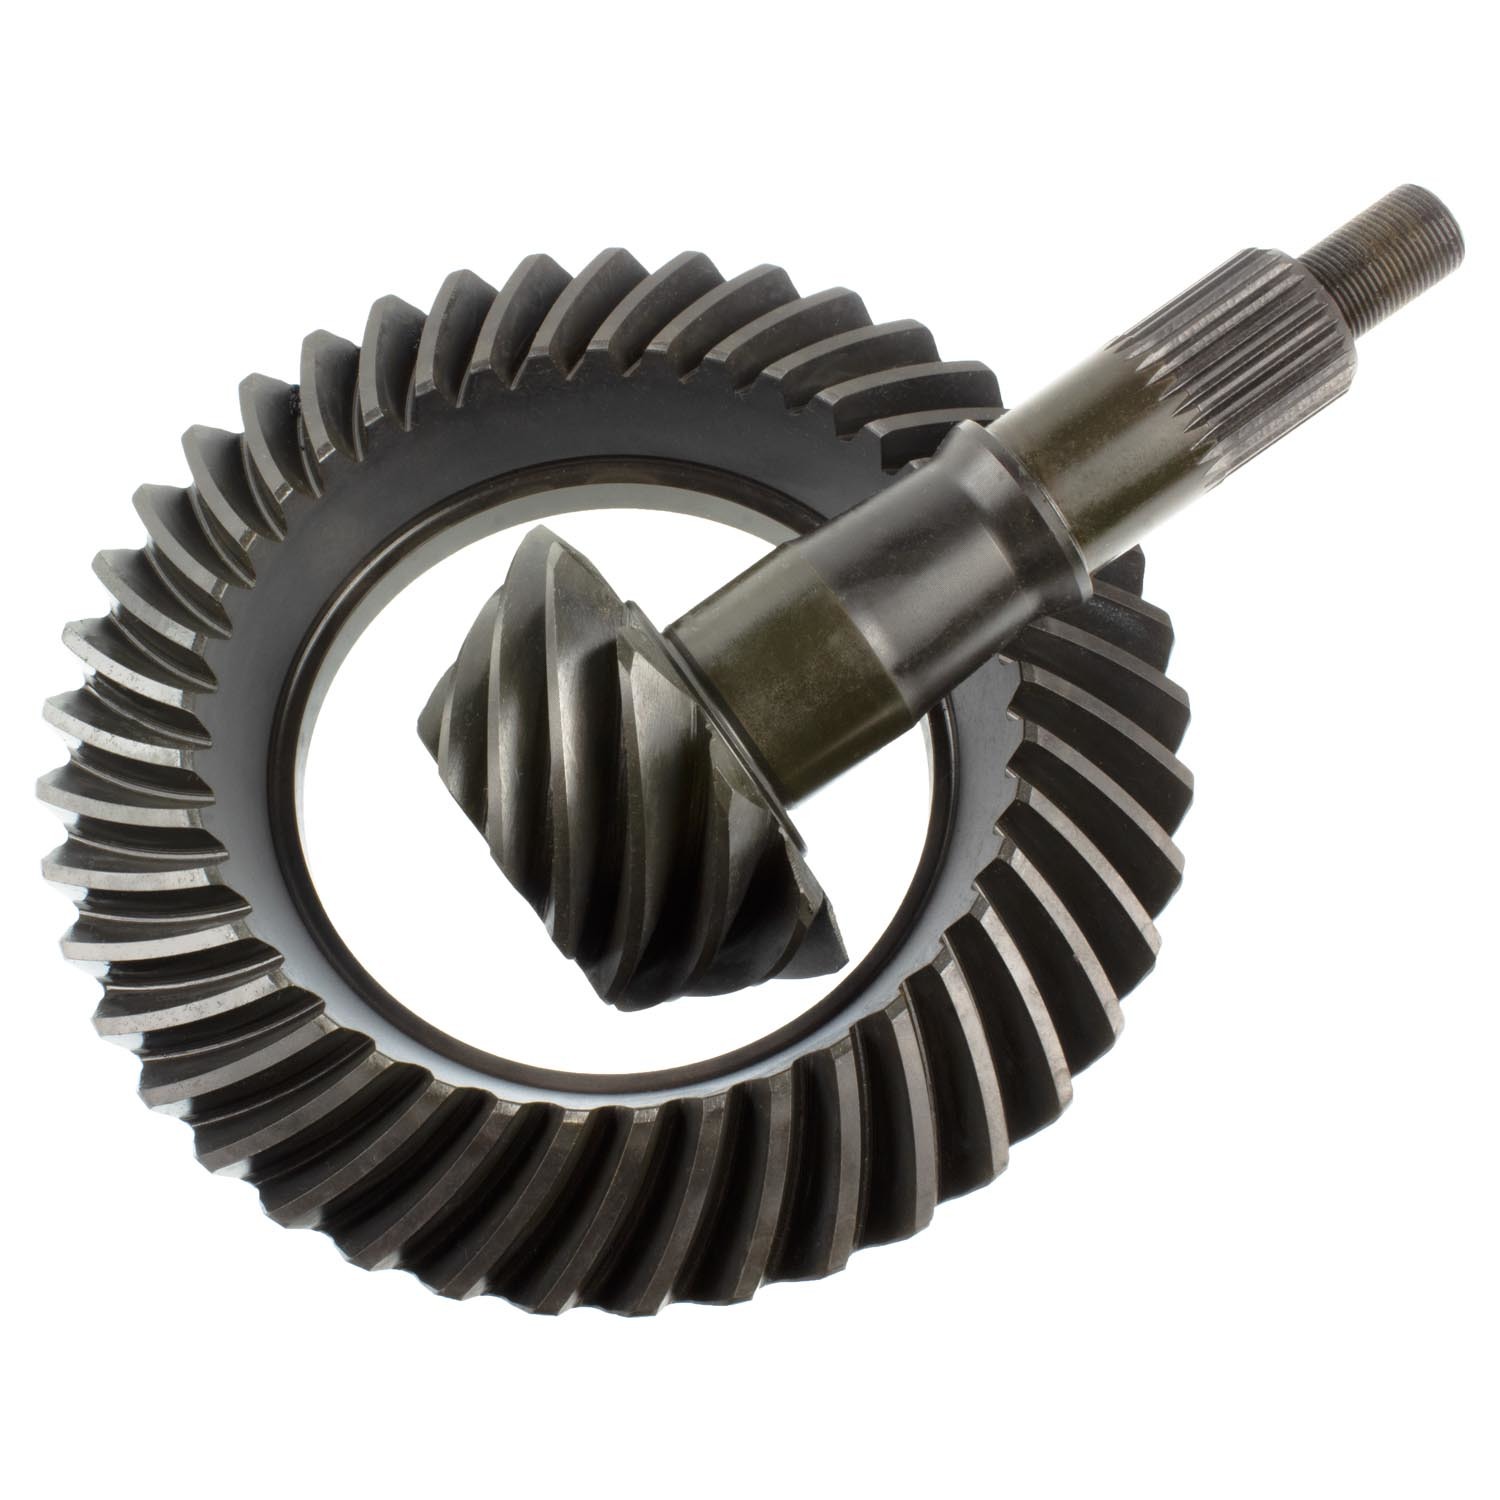 Richmond Gear F88373 - Ring and Pinion, Excel, 3.73 Ratio, 30 Spline Pinion, Ford 8.8 in, Kit